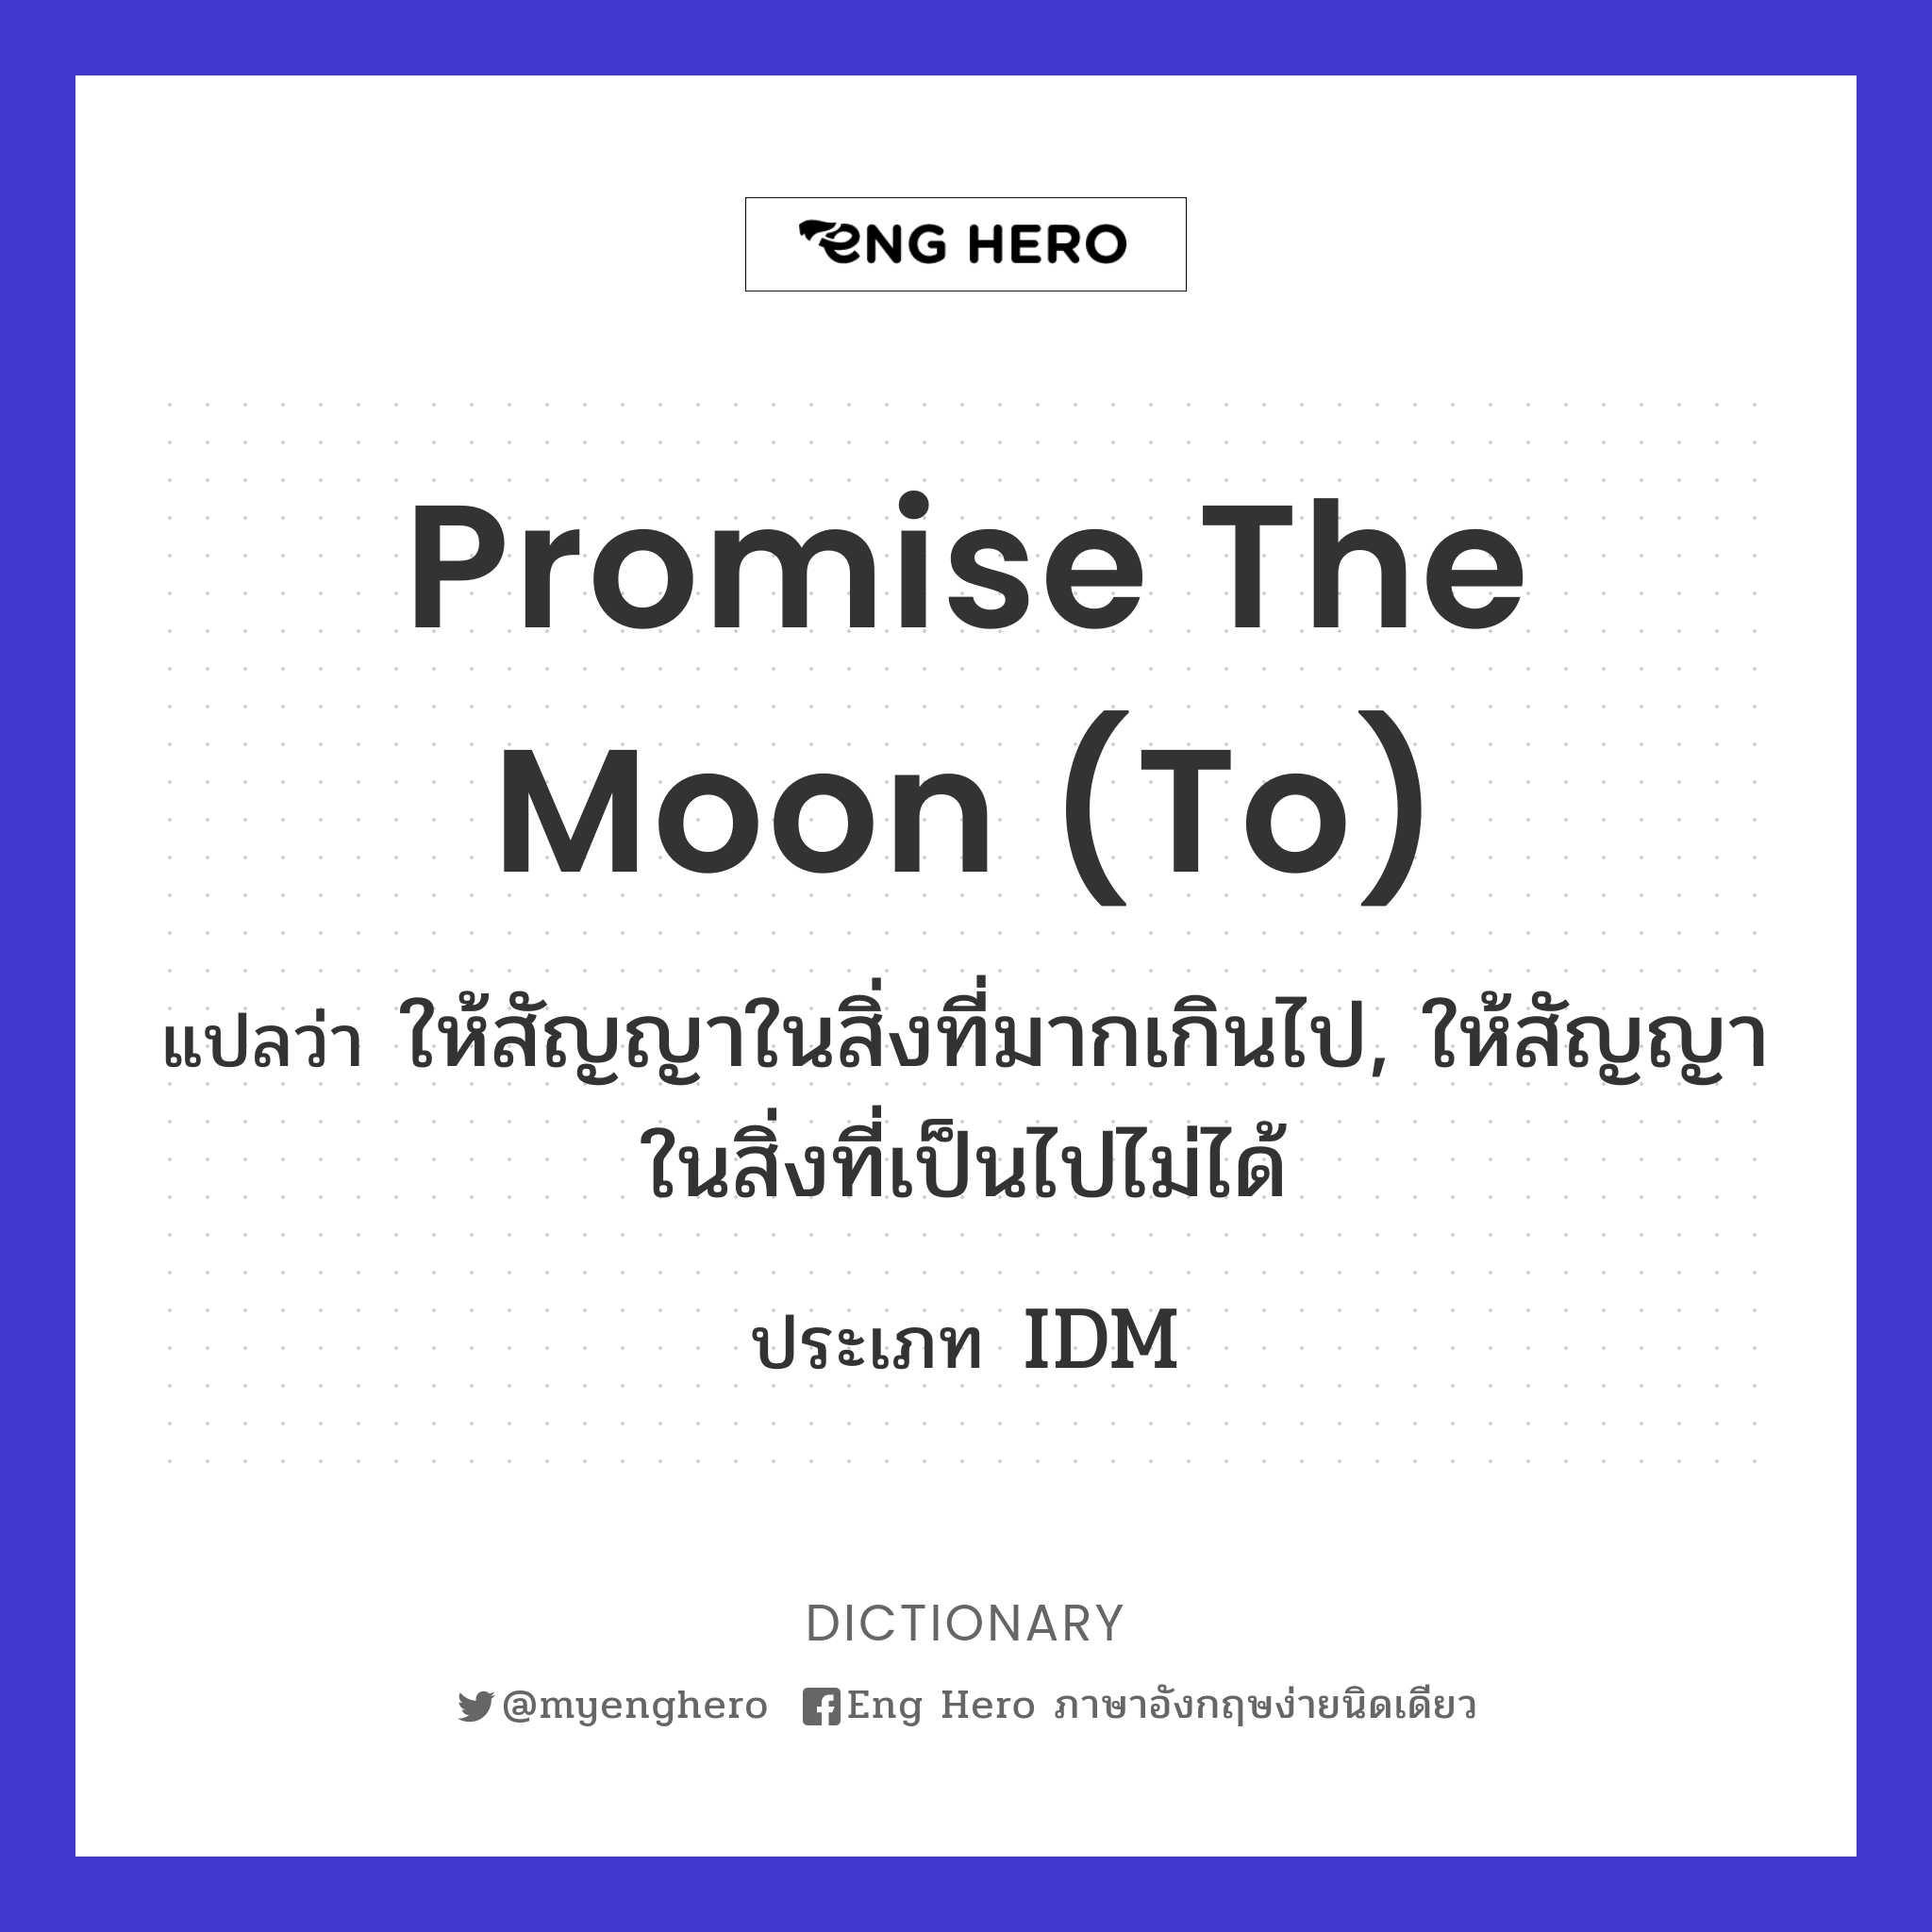 promise the moon (to)